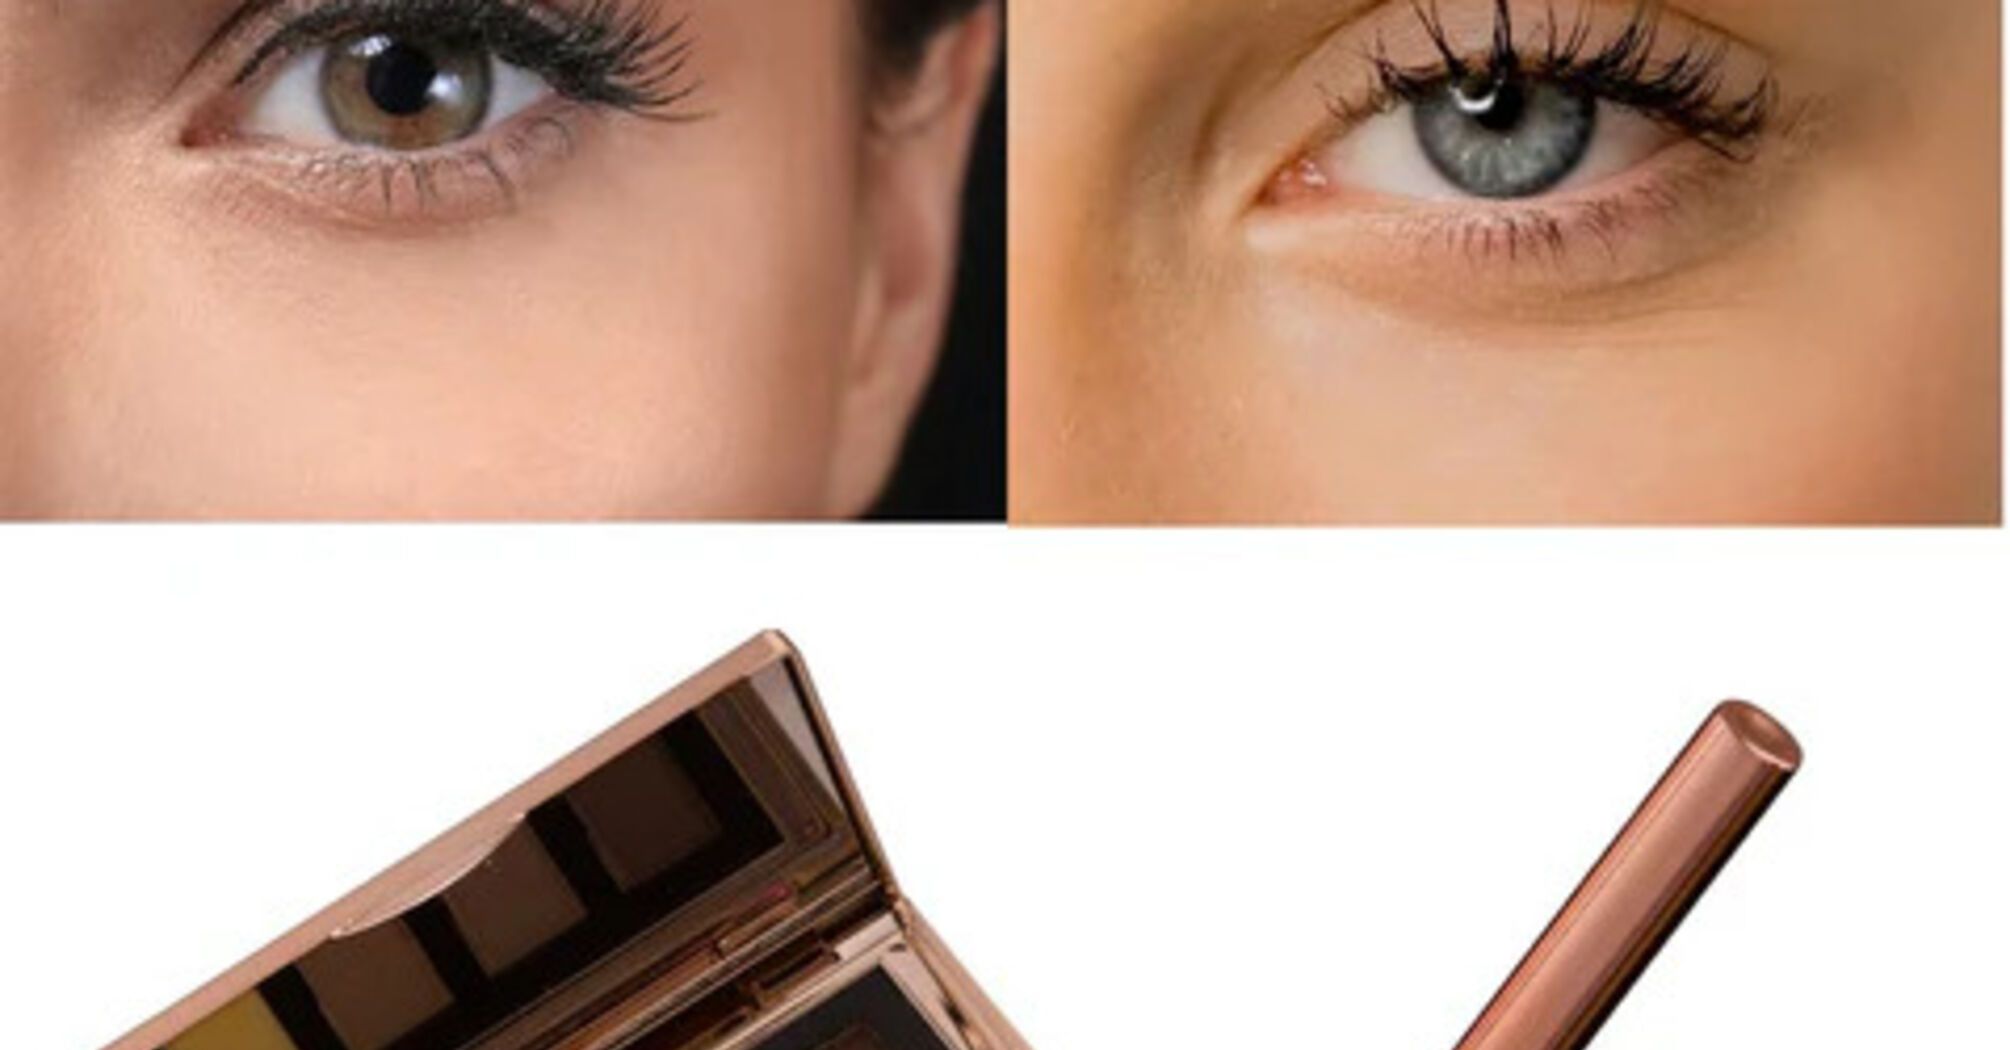 What is better to choose for eyebrow makeup